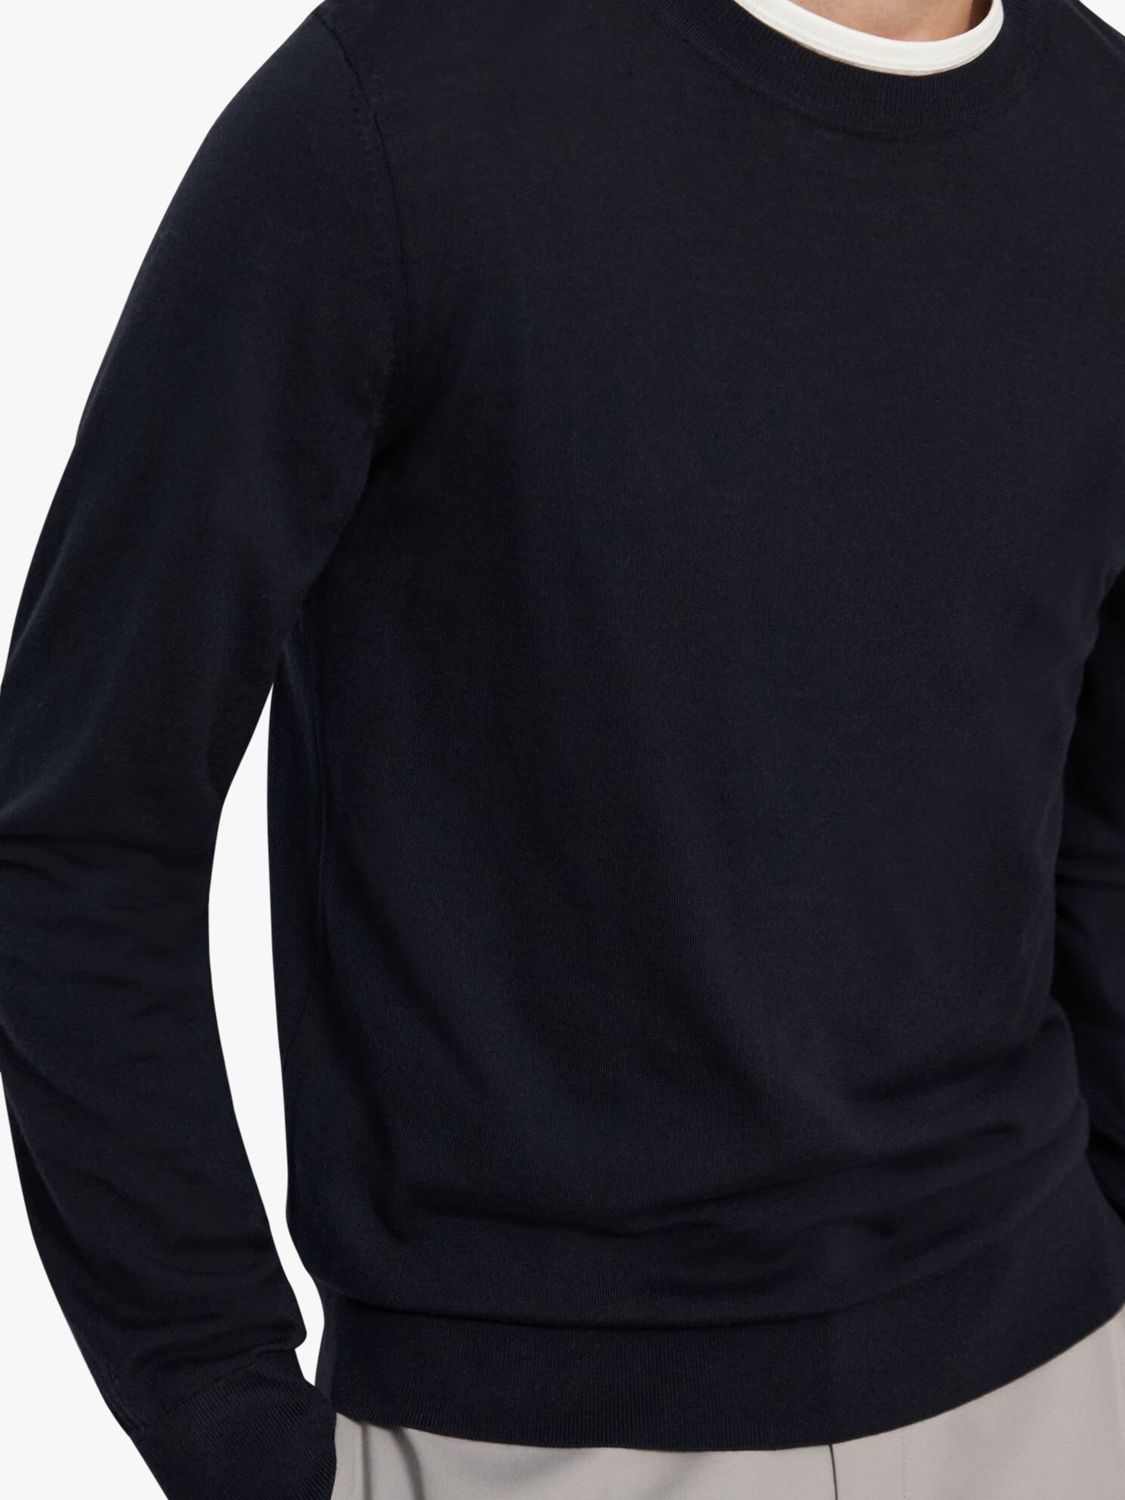 Buy Theory Crew Neck Wool Jumper, Navy Online at johnlewis.com